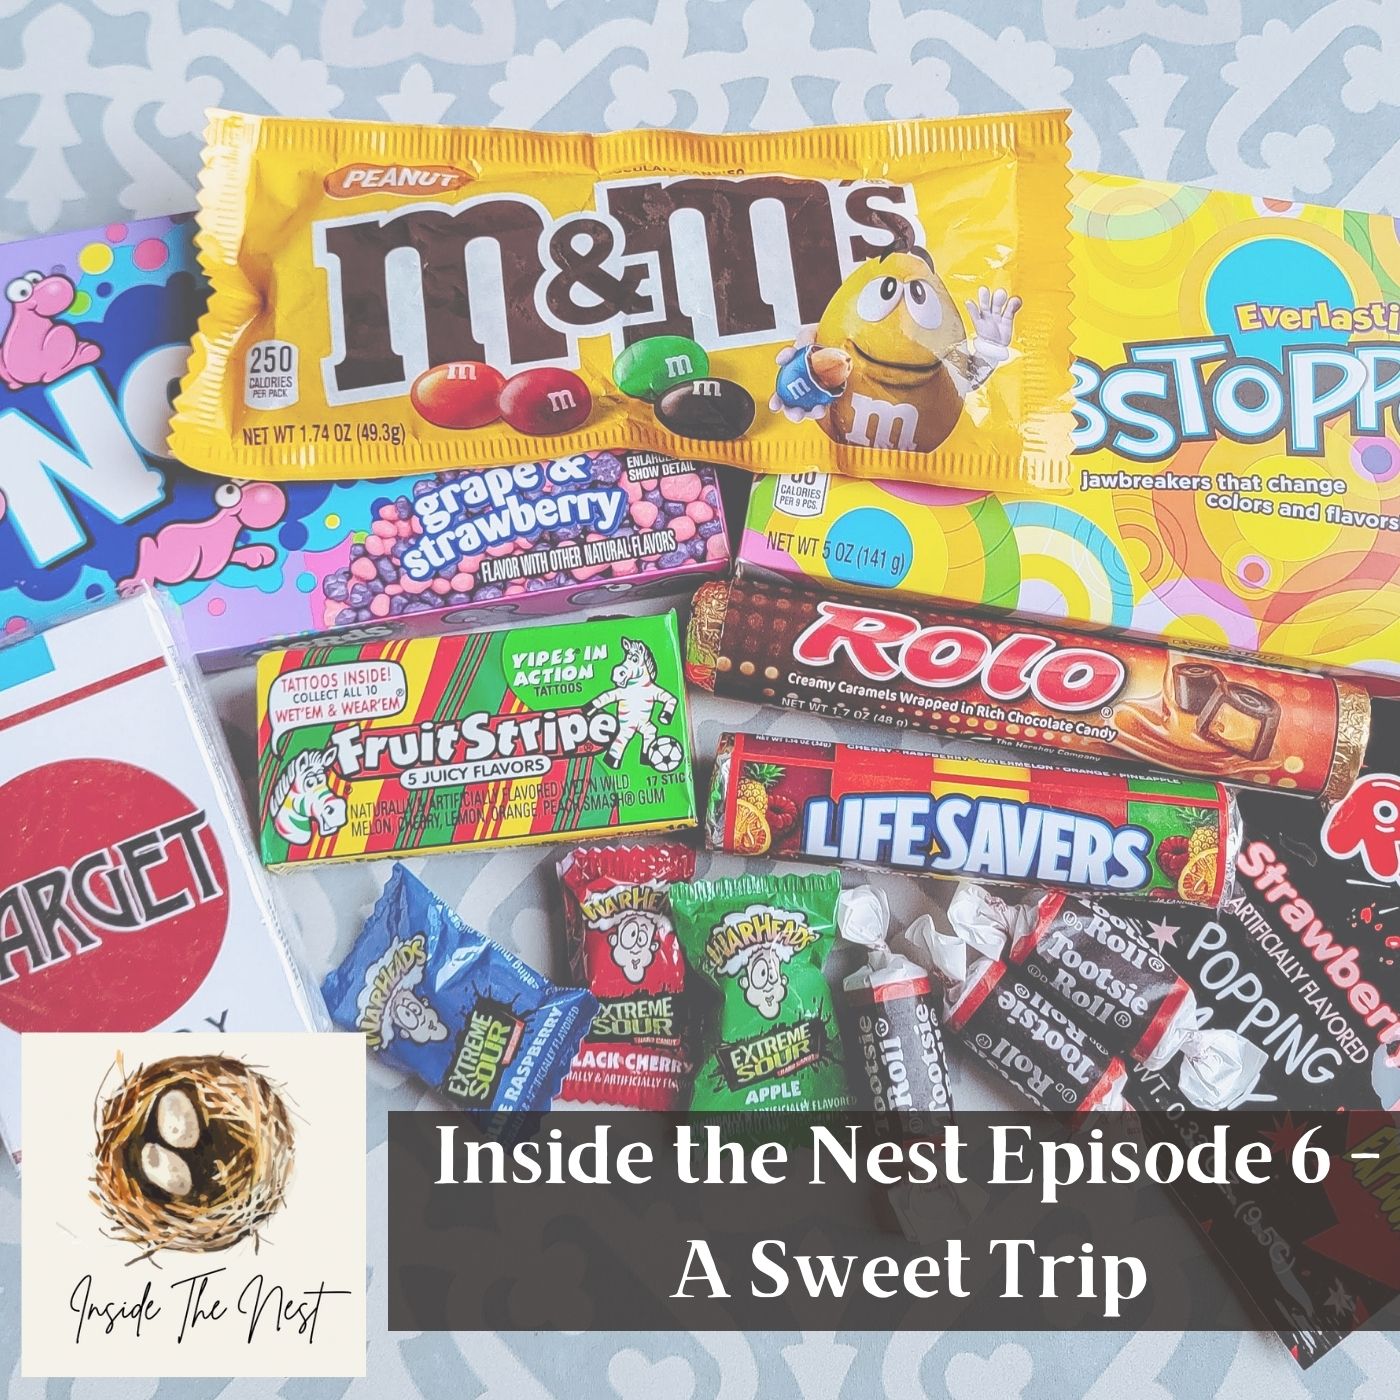 Inside The Nest Episode 6 - A Sweet Trip! Image